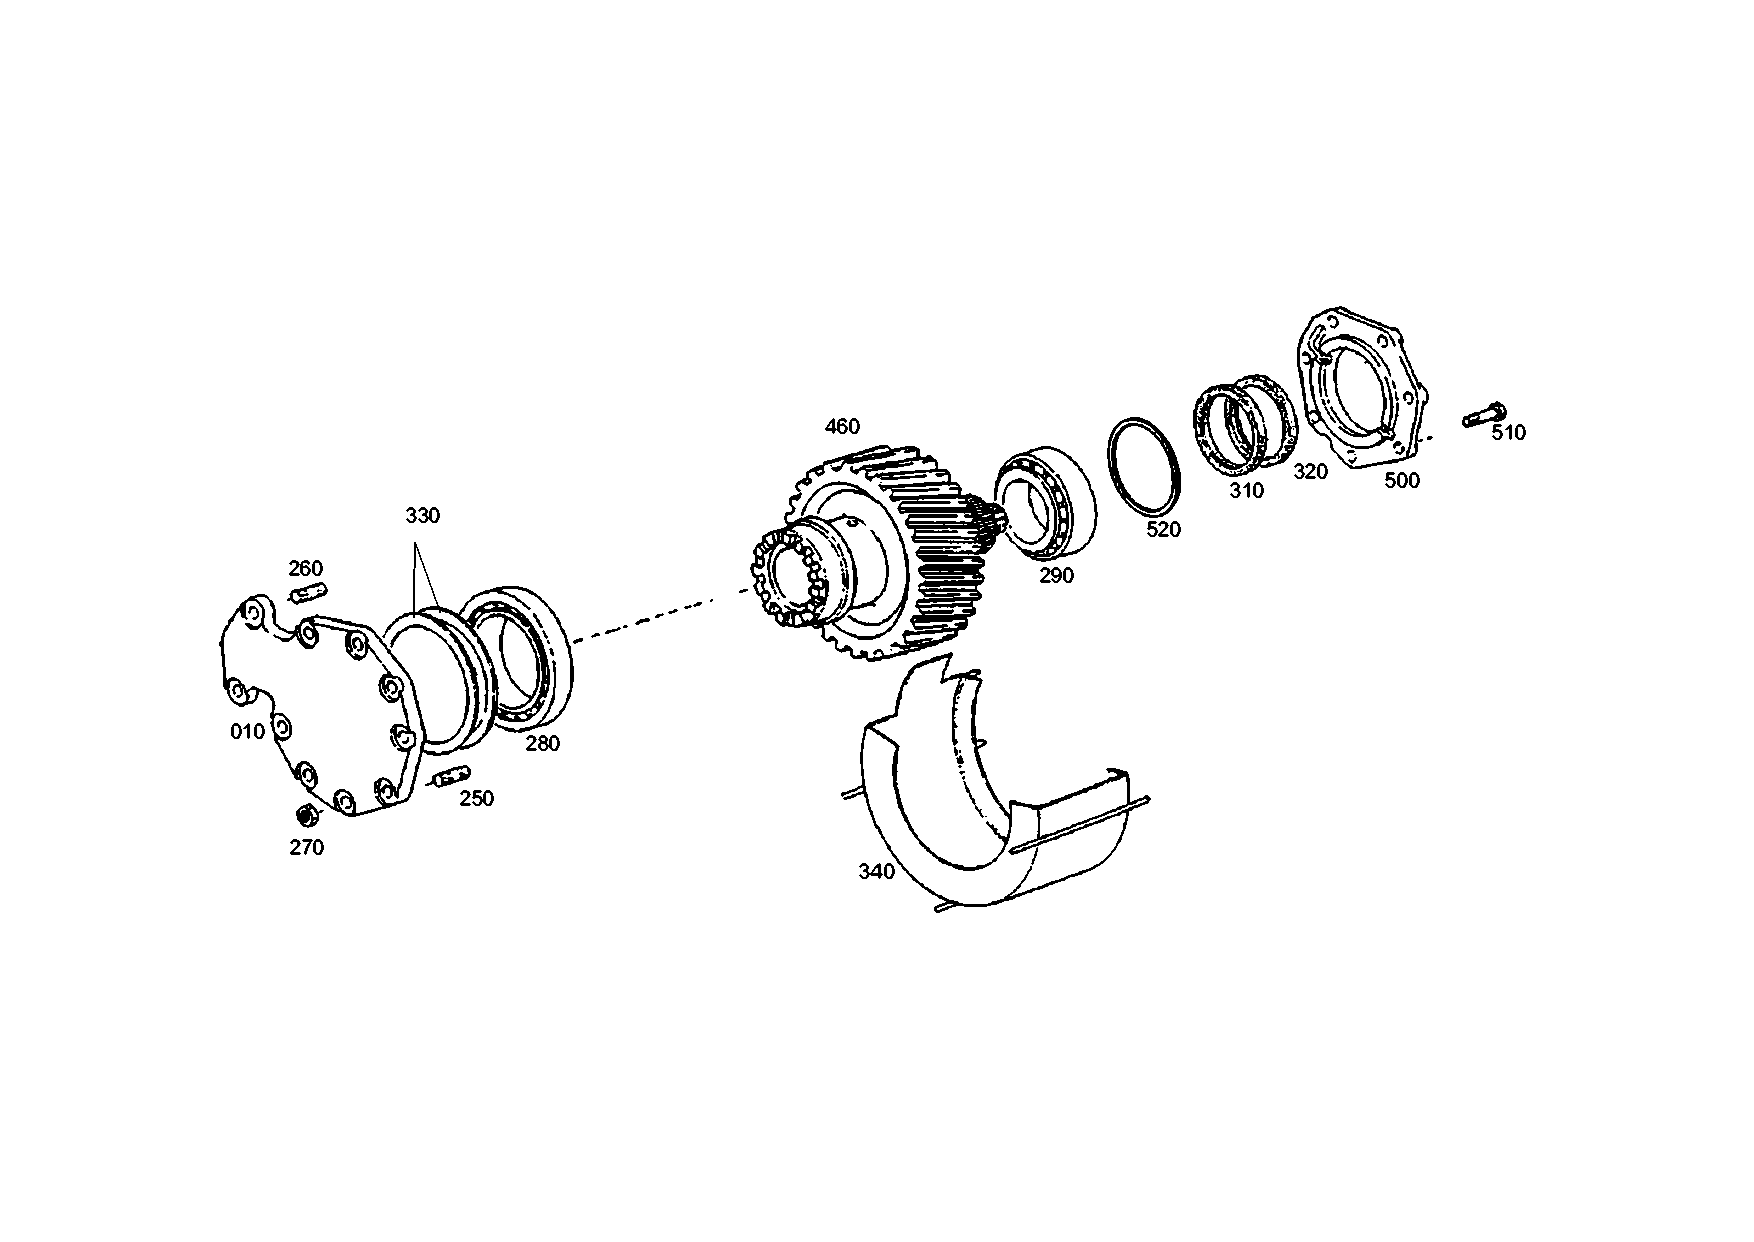 drawing for LUNA EQUIPOS INDUSTRIEALES, S.A. 171600220080 - OUTPUT SHAFT (figure 3)